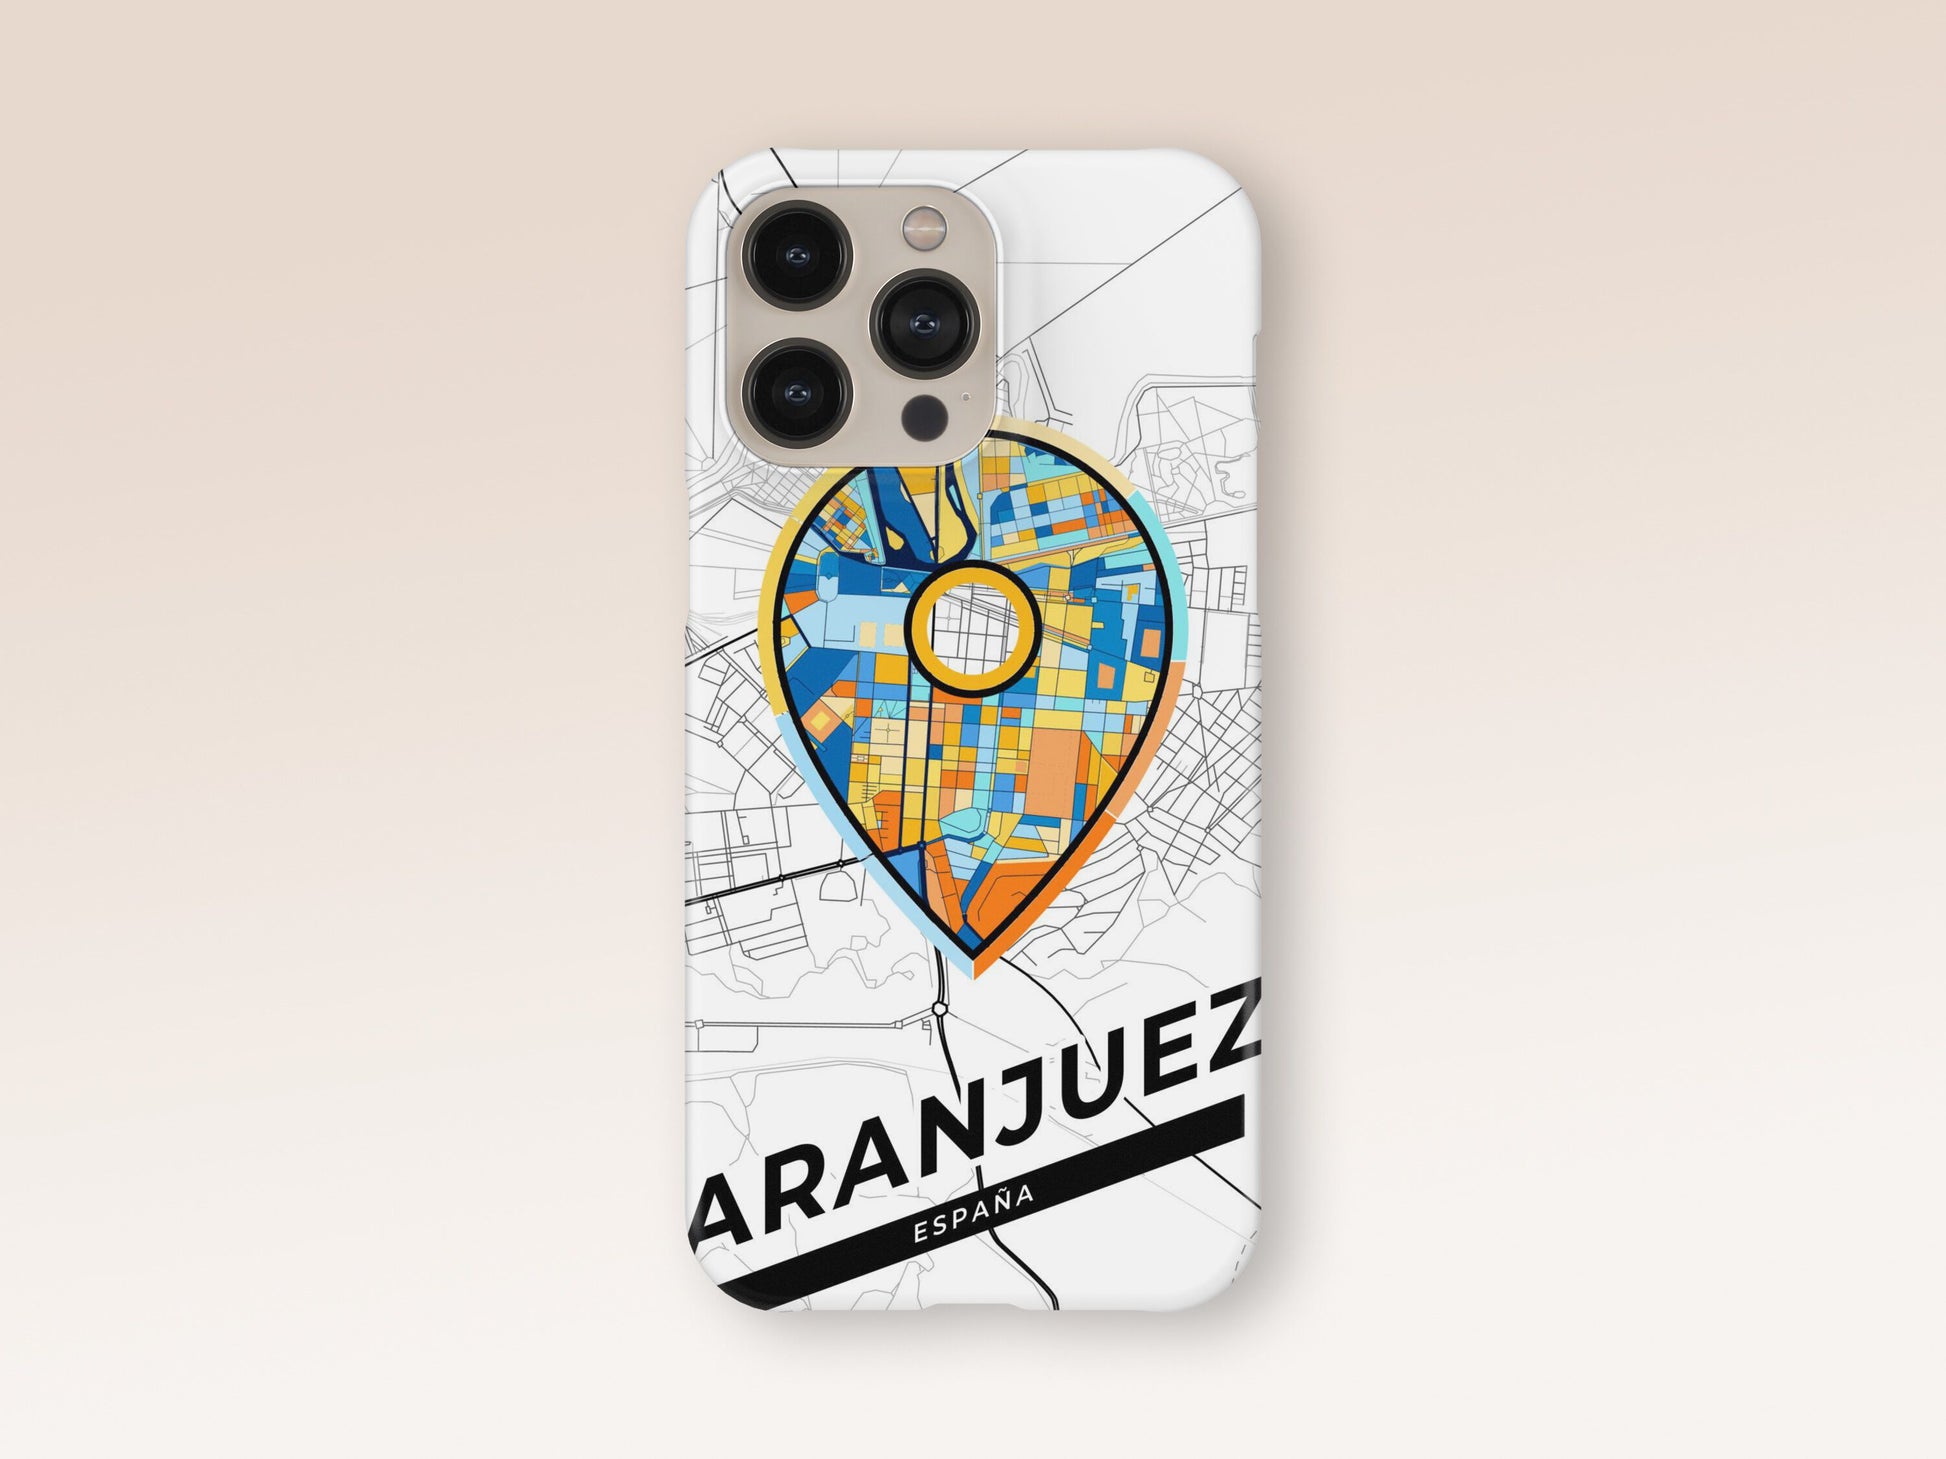 Aranjuez Spain slim phone case with colorful icon. Birthday, wedding or housewarming gift. Couple match cases. 1